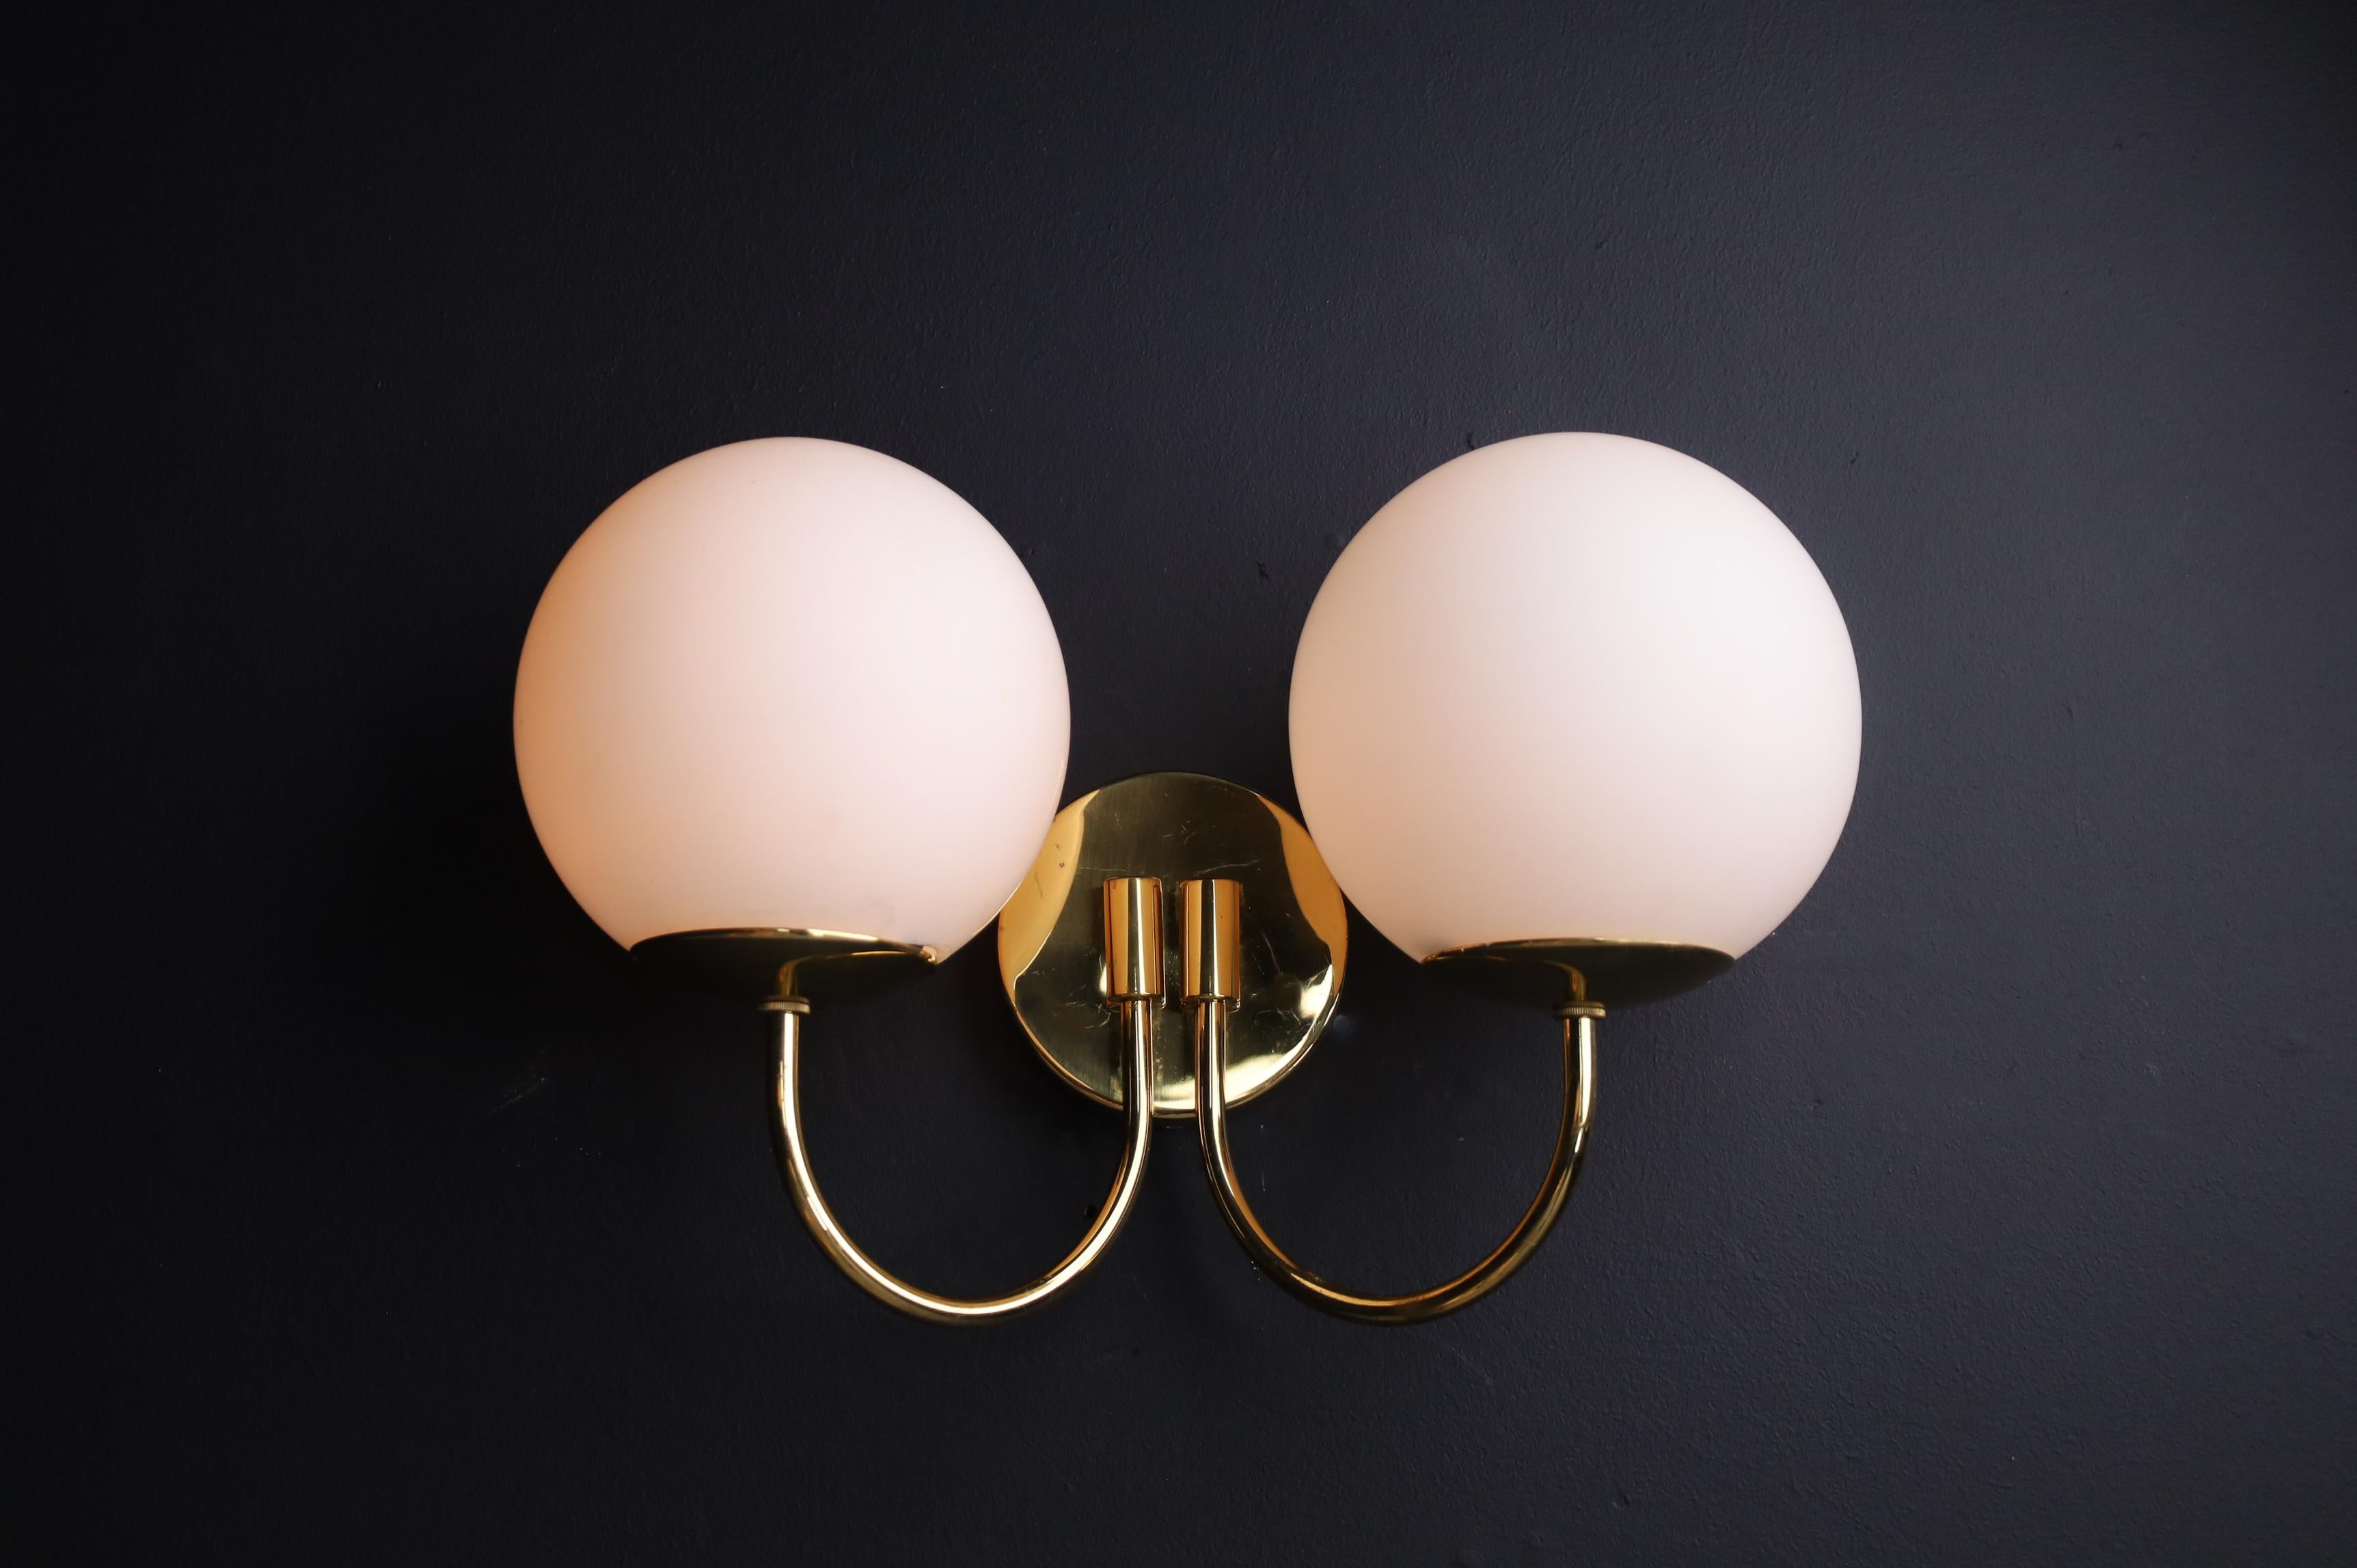 Elegant Sconces with Brass Fixtures and Opaline Glass Globes, Italy, 1960s In Good Condition For Sale In Almelo, NL